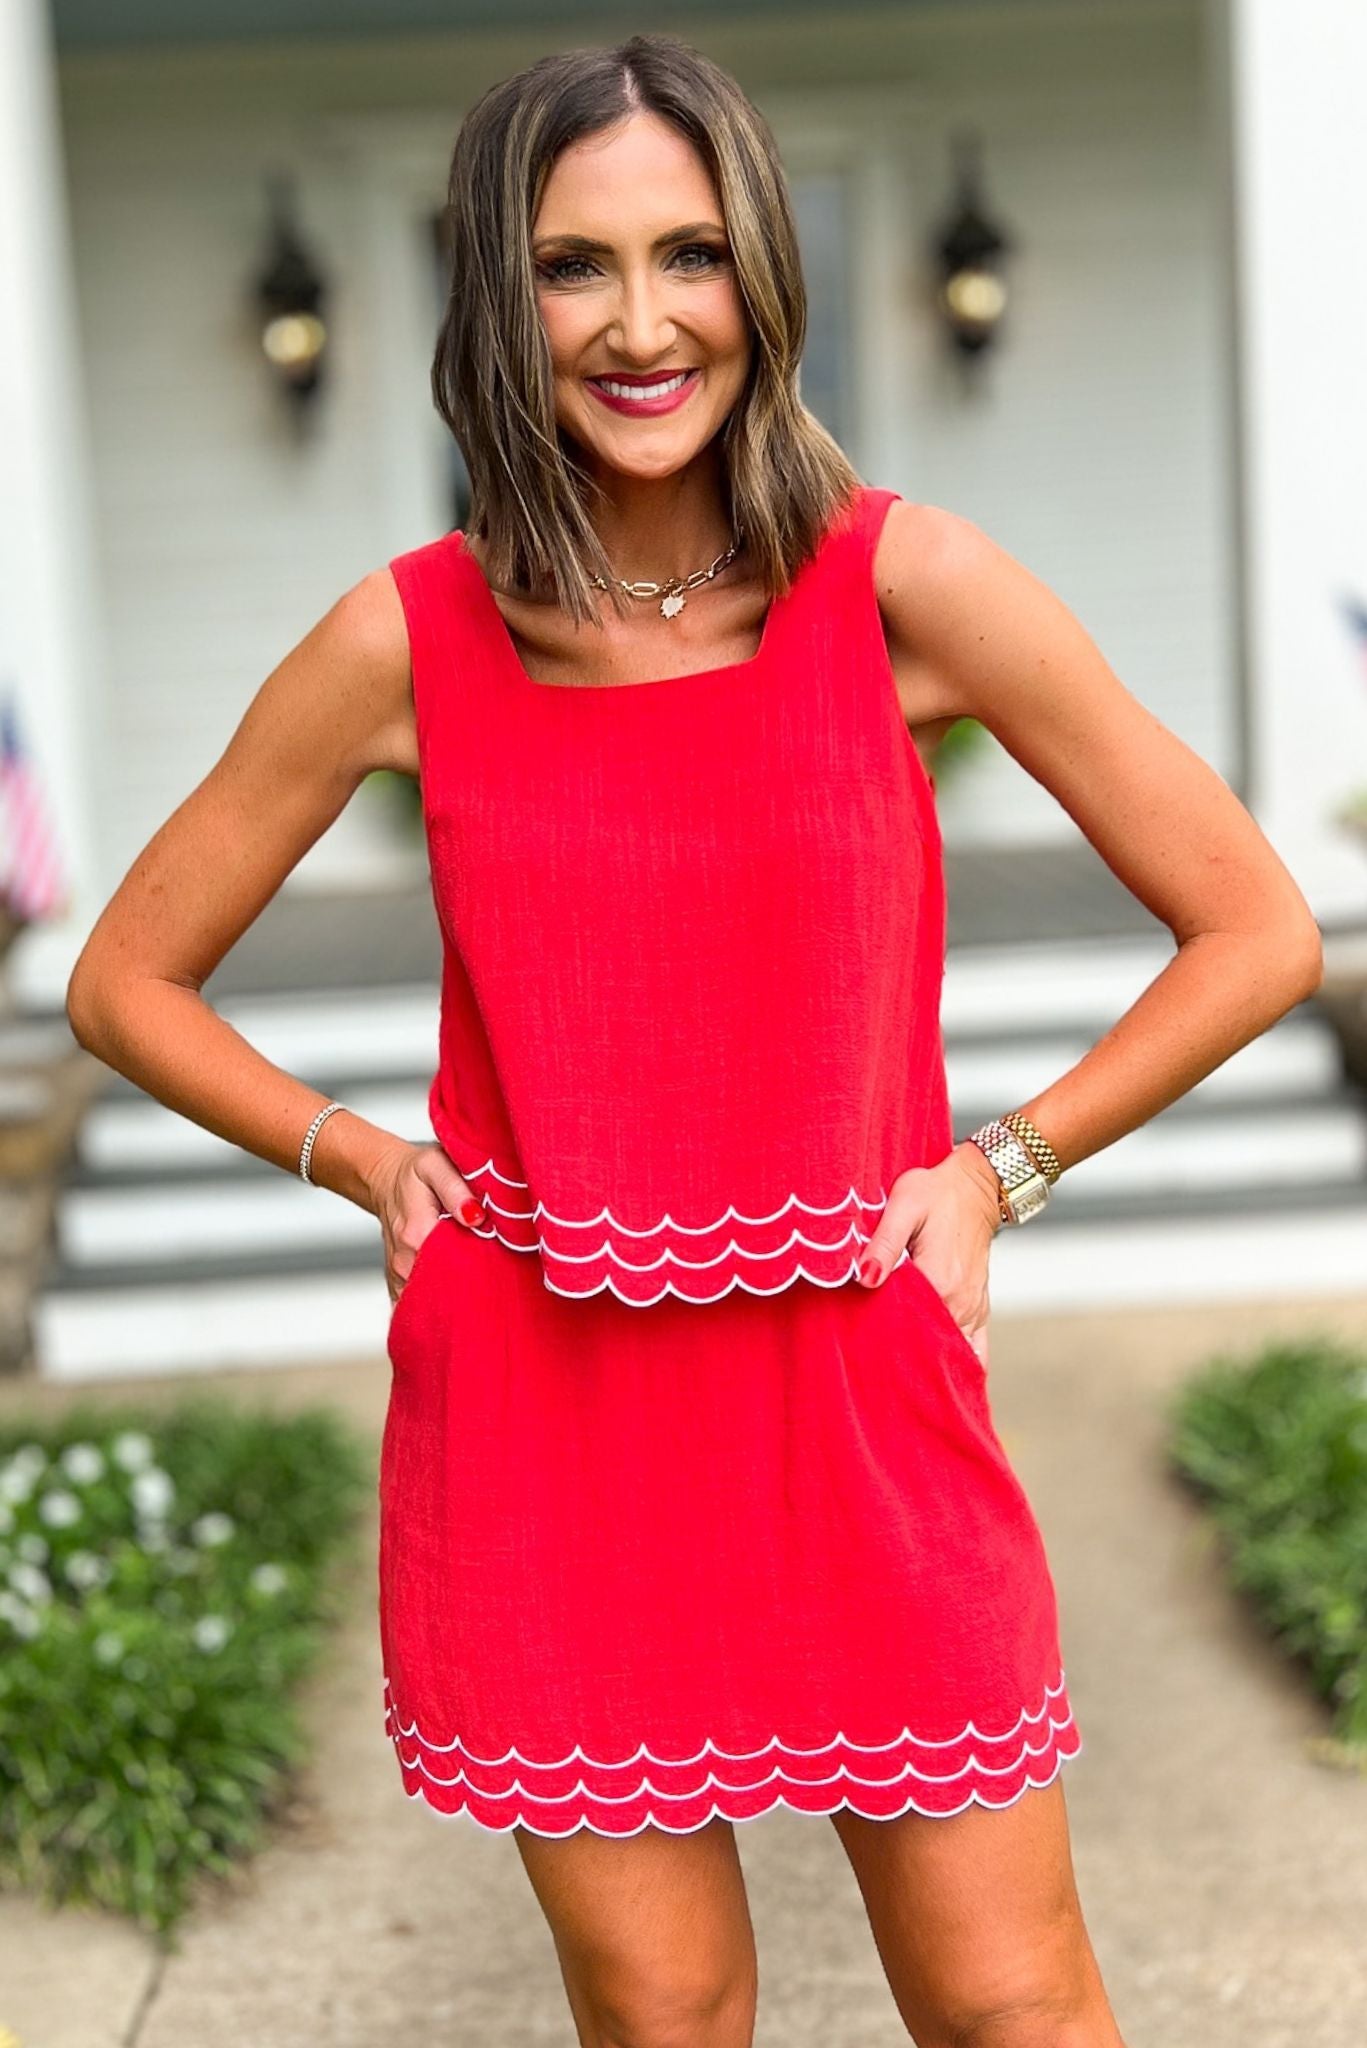 SSYS The Elaine Scallop Ric Rac Linen Skort Set In Red, ssys set, ssys the label, elevated set, must have set, Fourth of July collection, must have style, mom style, summer style, shop style your senses by MALLORY FITZSIMMONS, ssys by MALLORY FITZSIMMONS